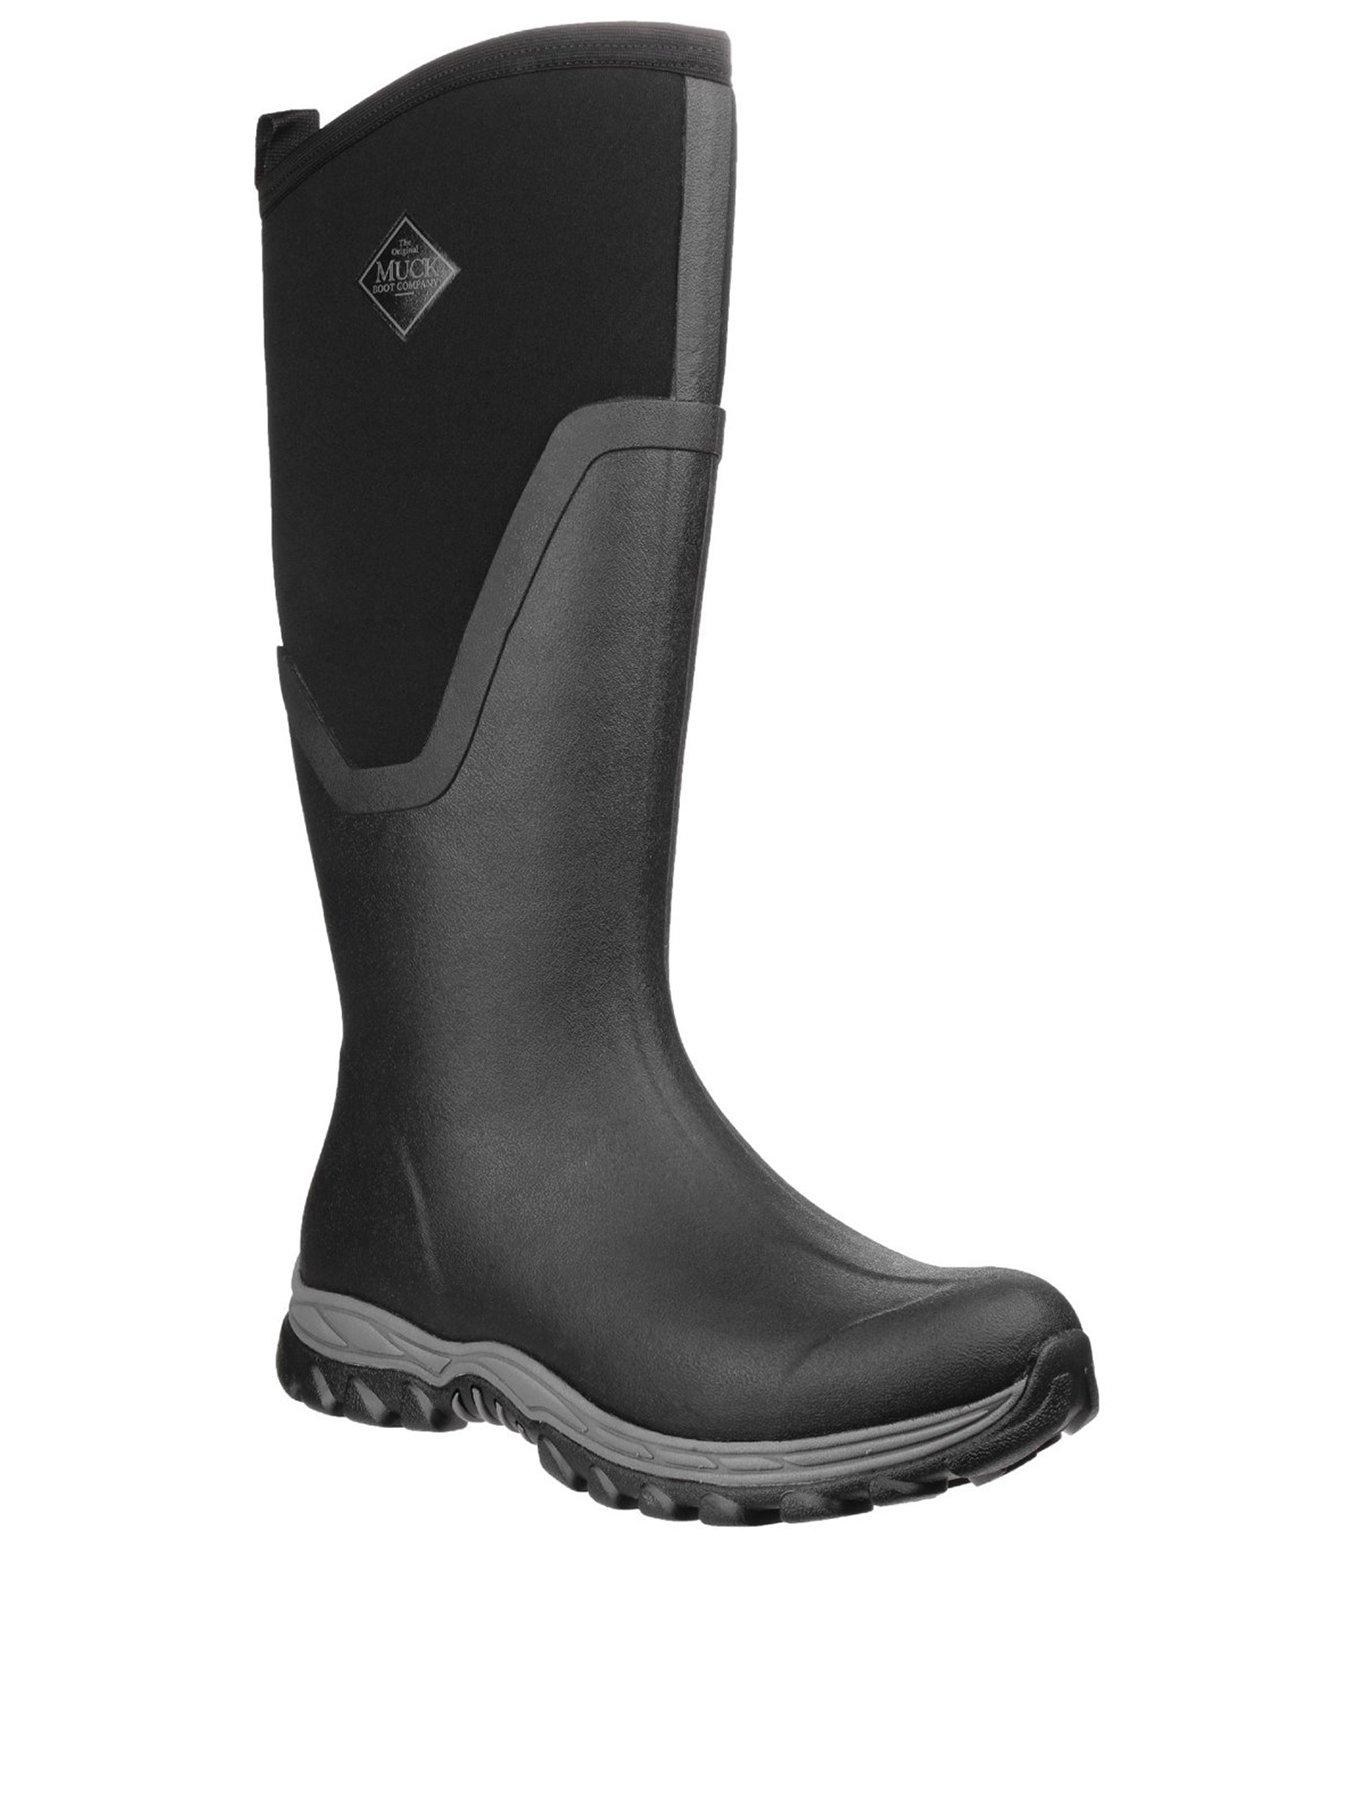 riding boot style wellies